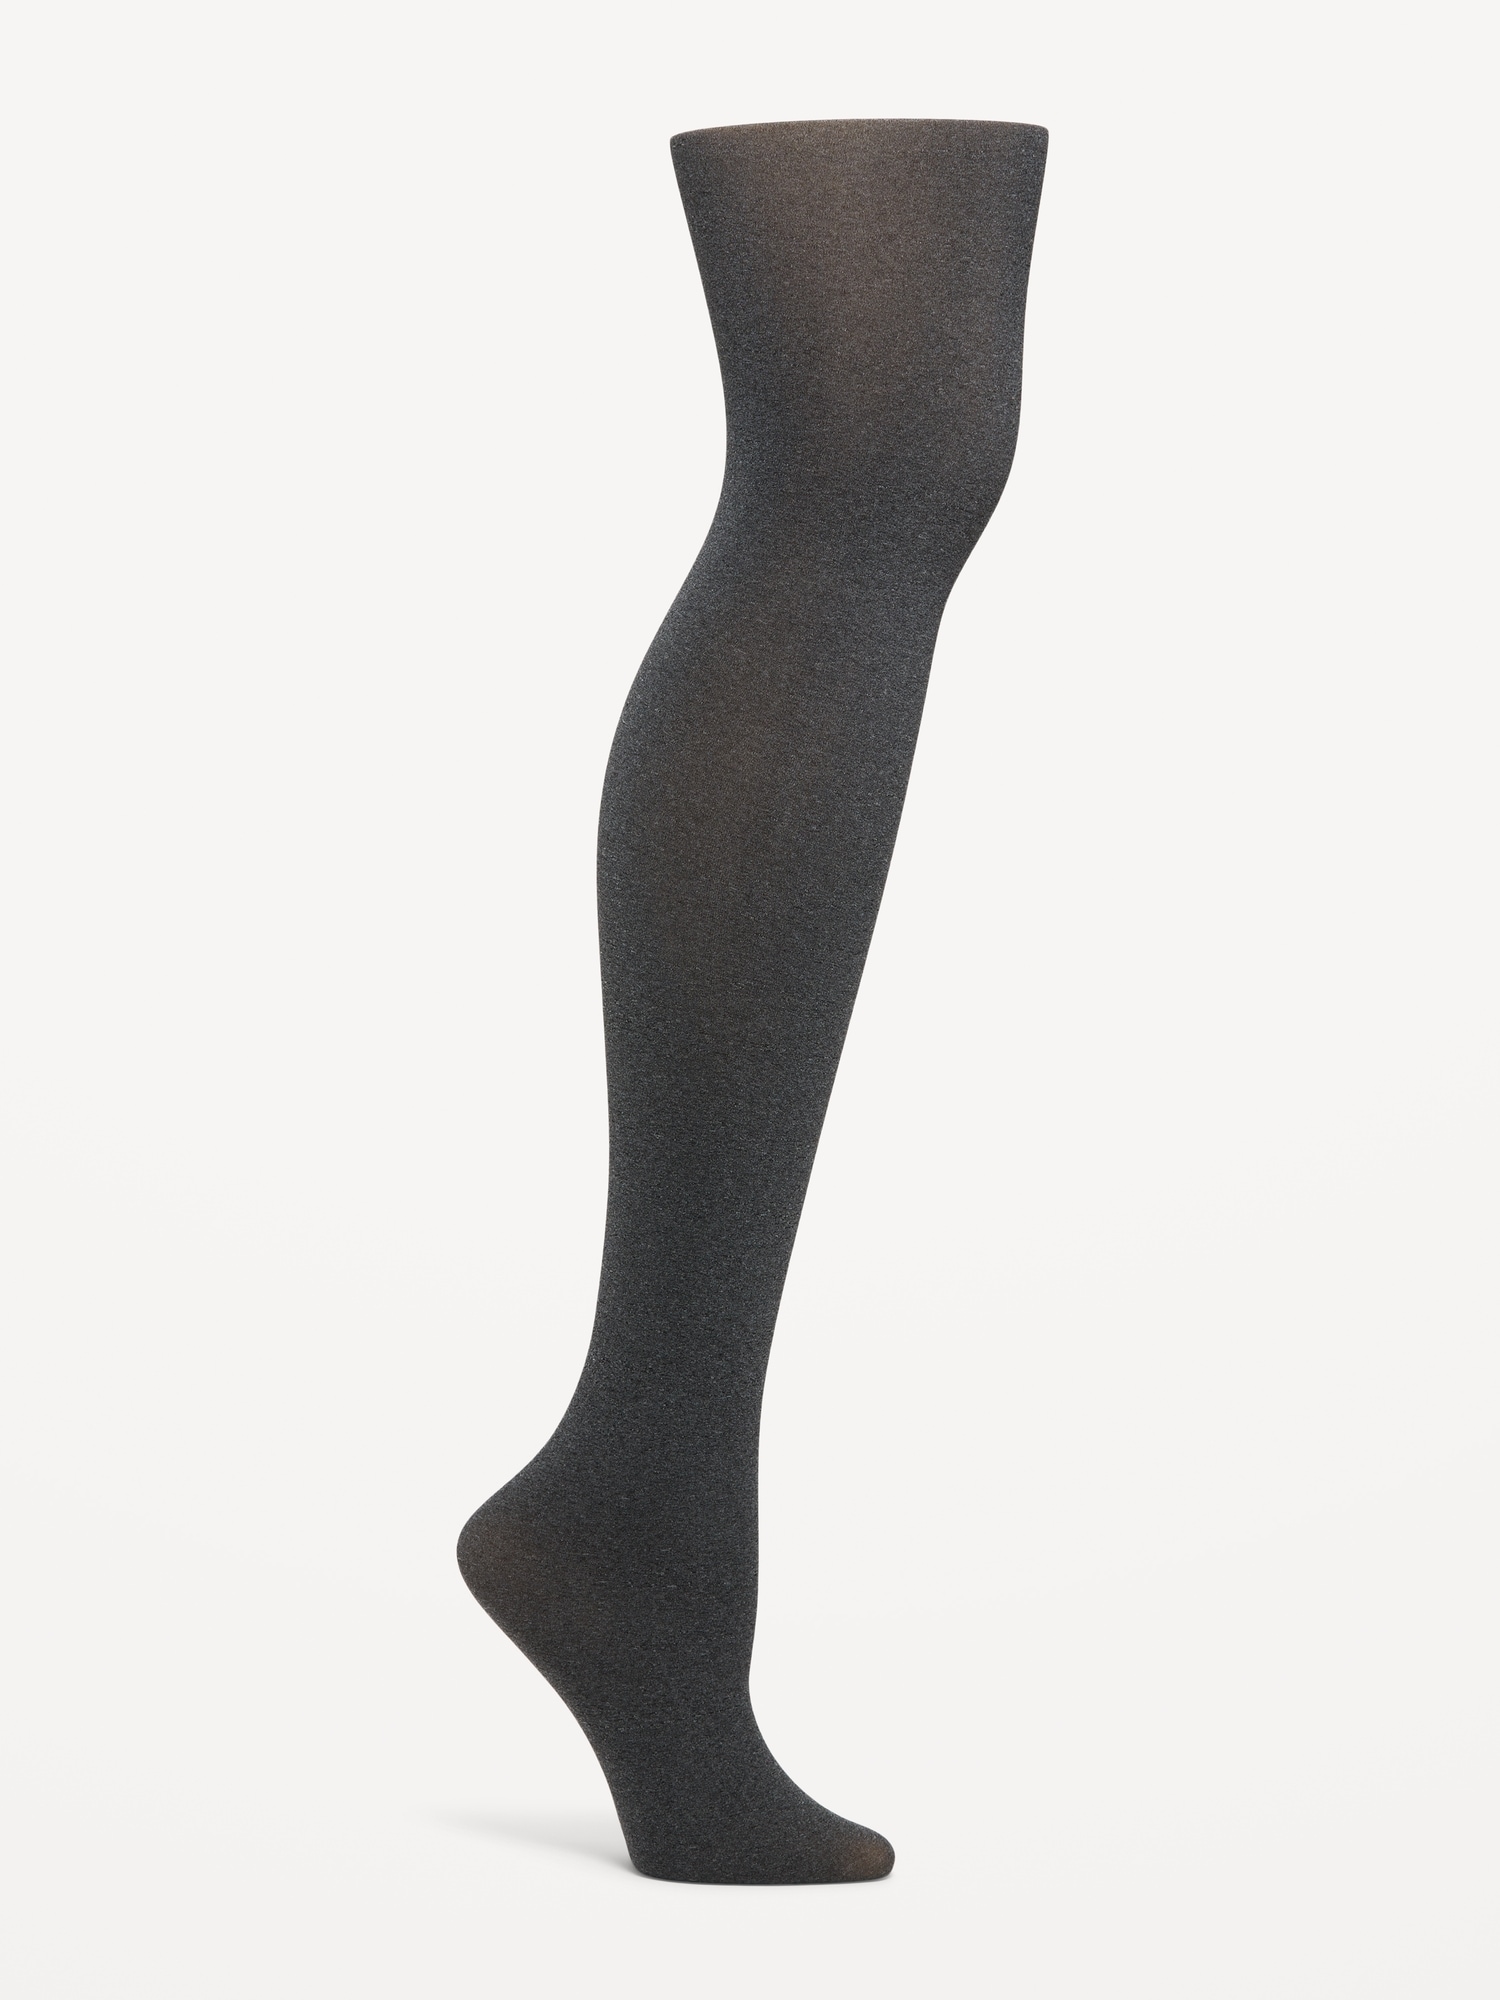 These $8 Temperature Adjusting Tights Have 19,100+ 5-Star Reviews